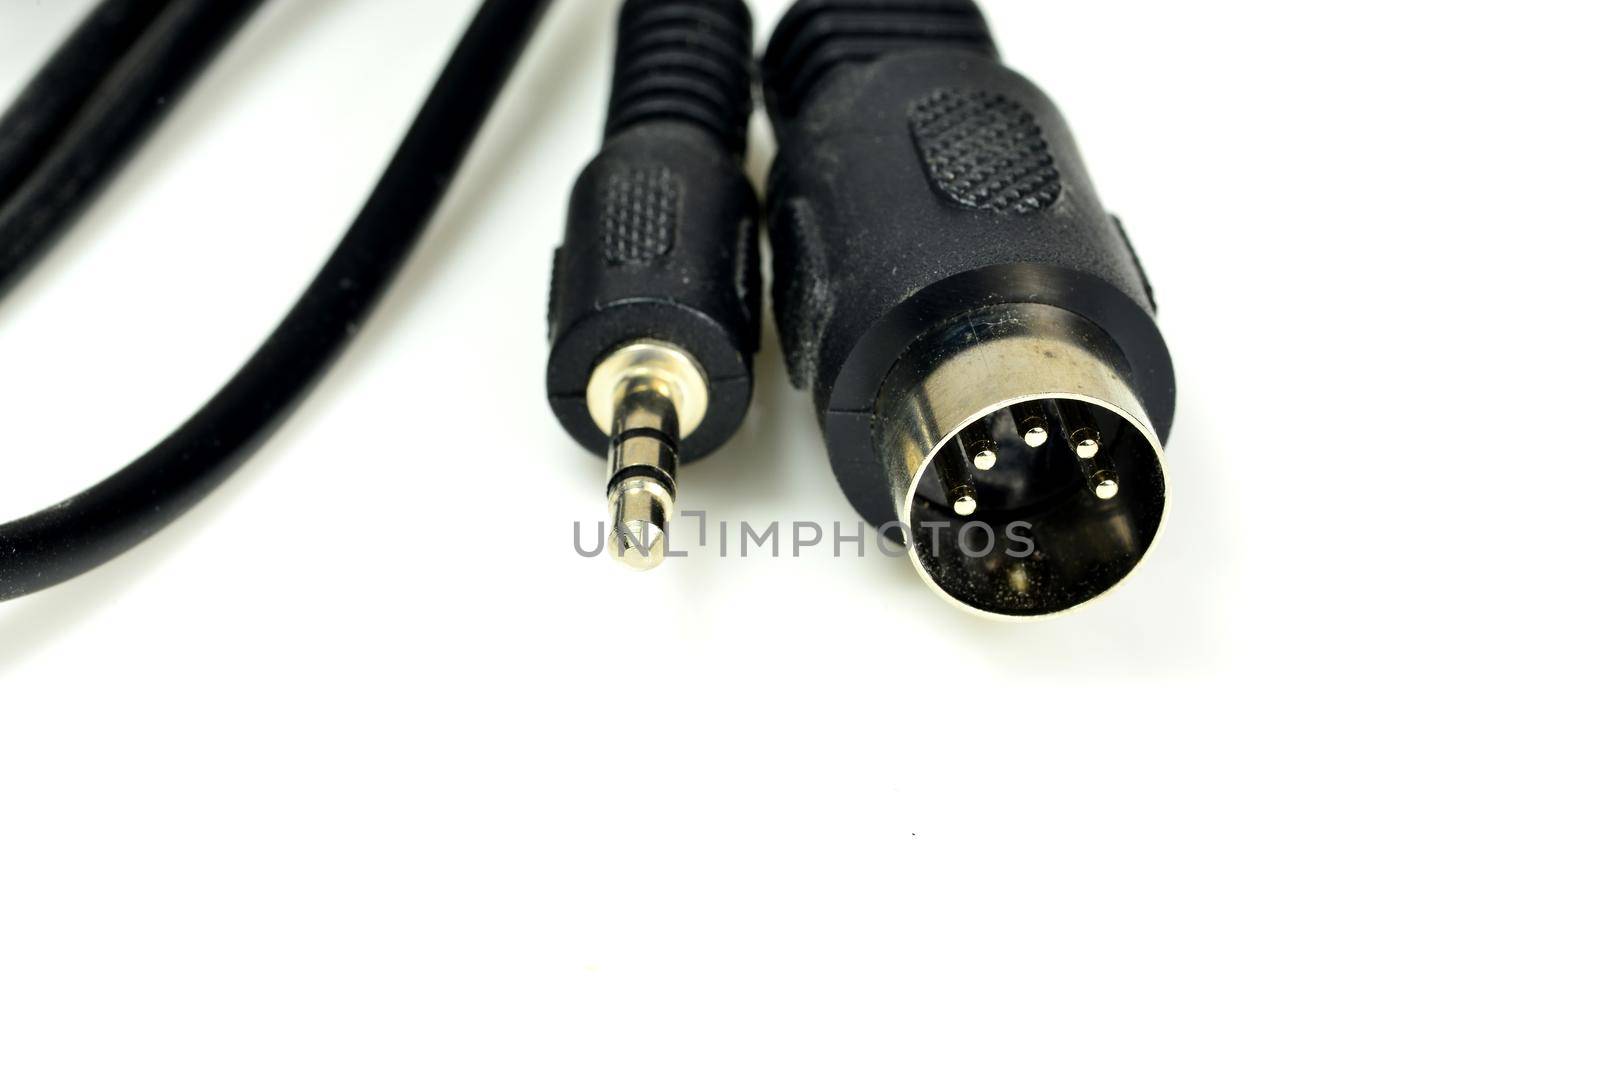 Five-pin male 180° DIN connector and 3.5mm phono jack by Jochen